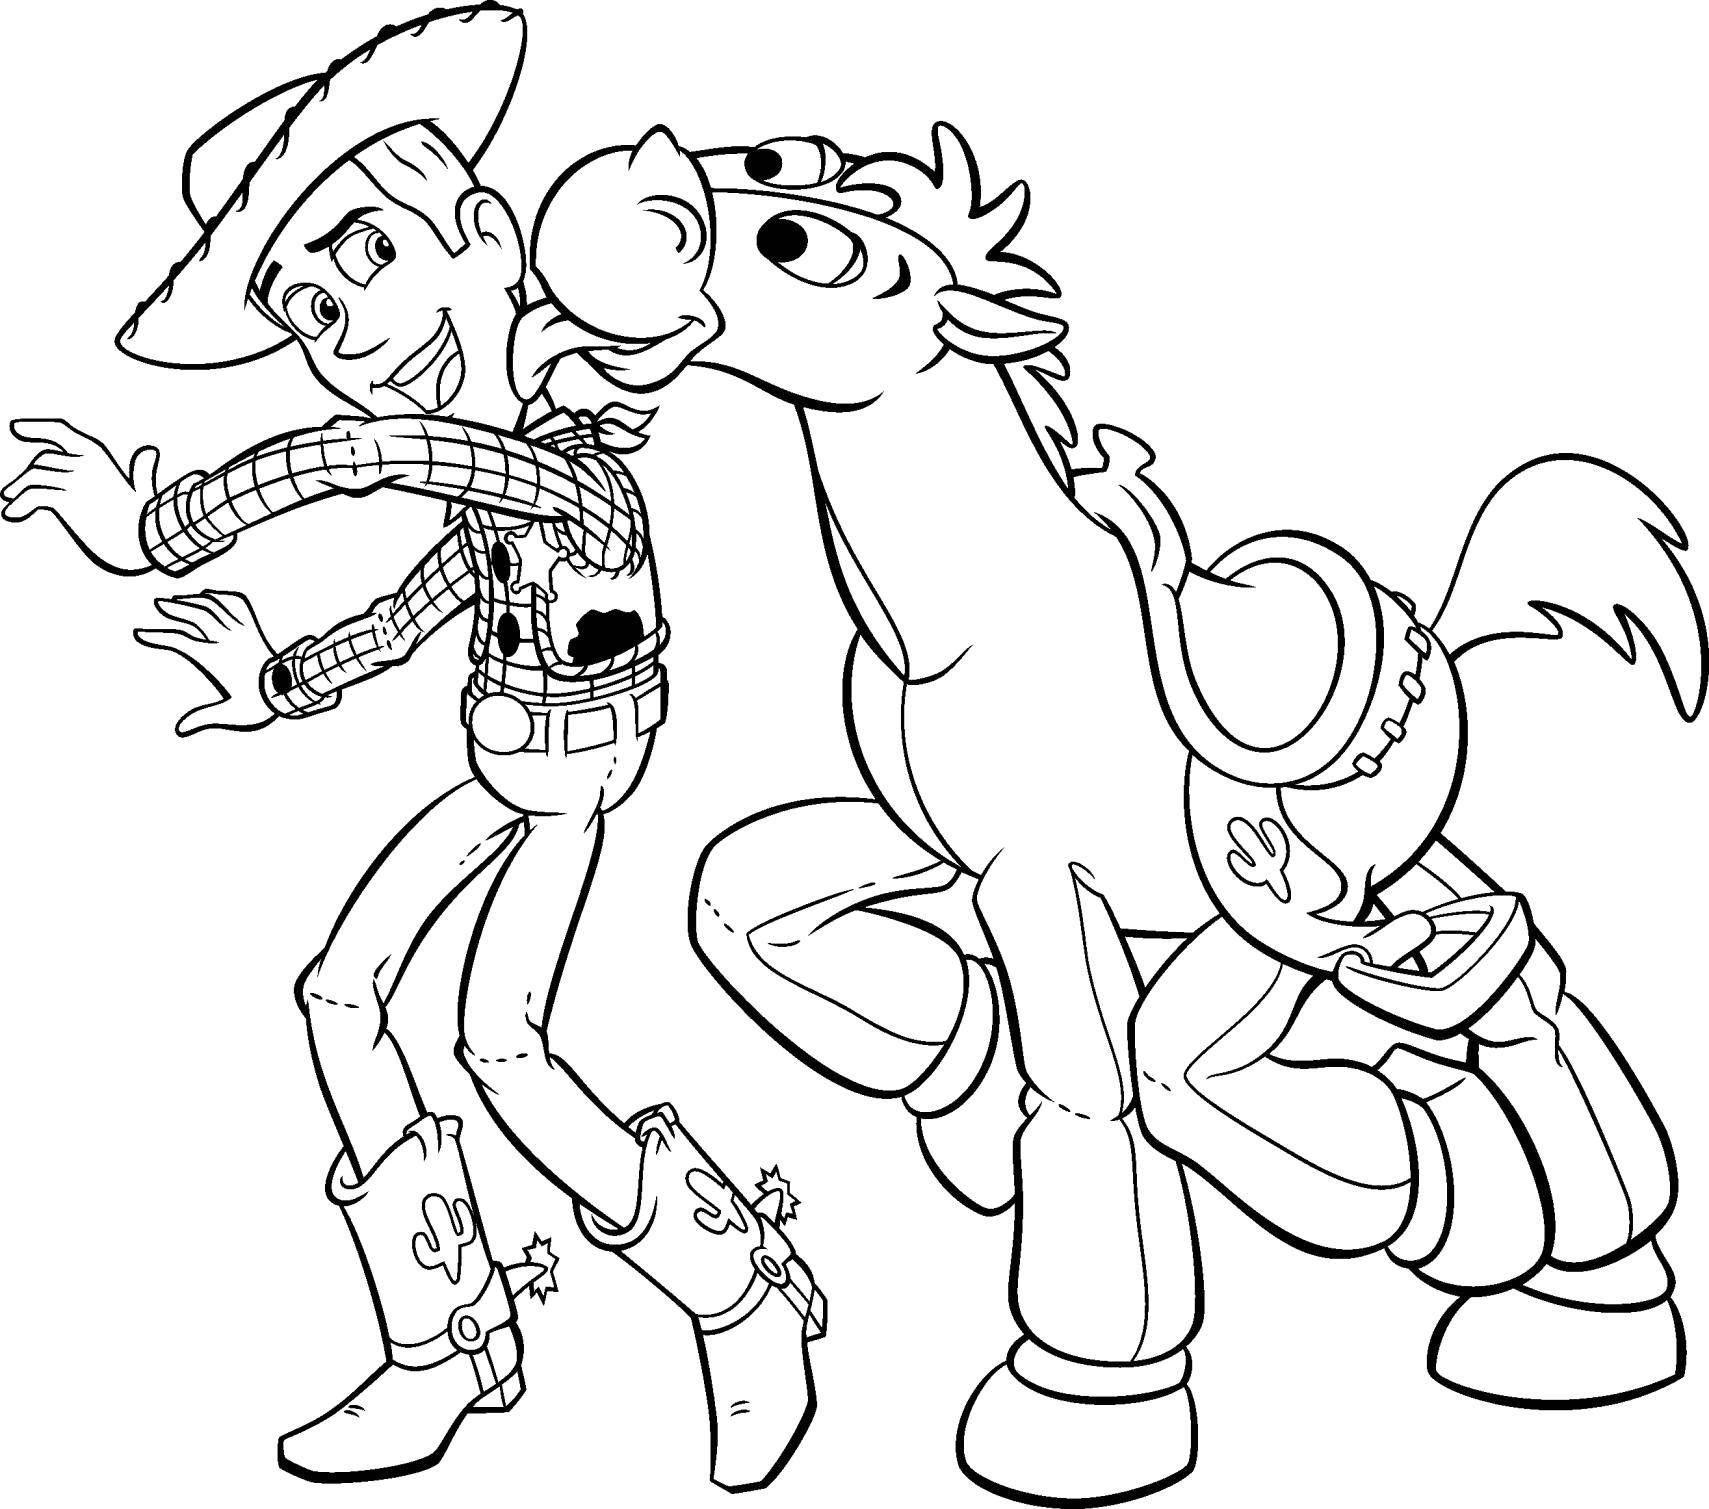 Coloring Sheriff woody horse. Category Disney coloring pages. Tags:  Cartoon character, toy Story.